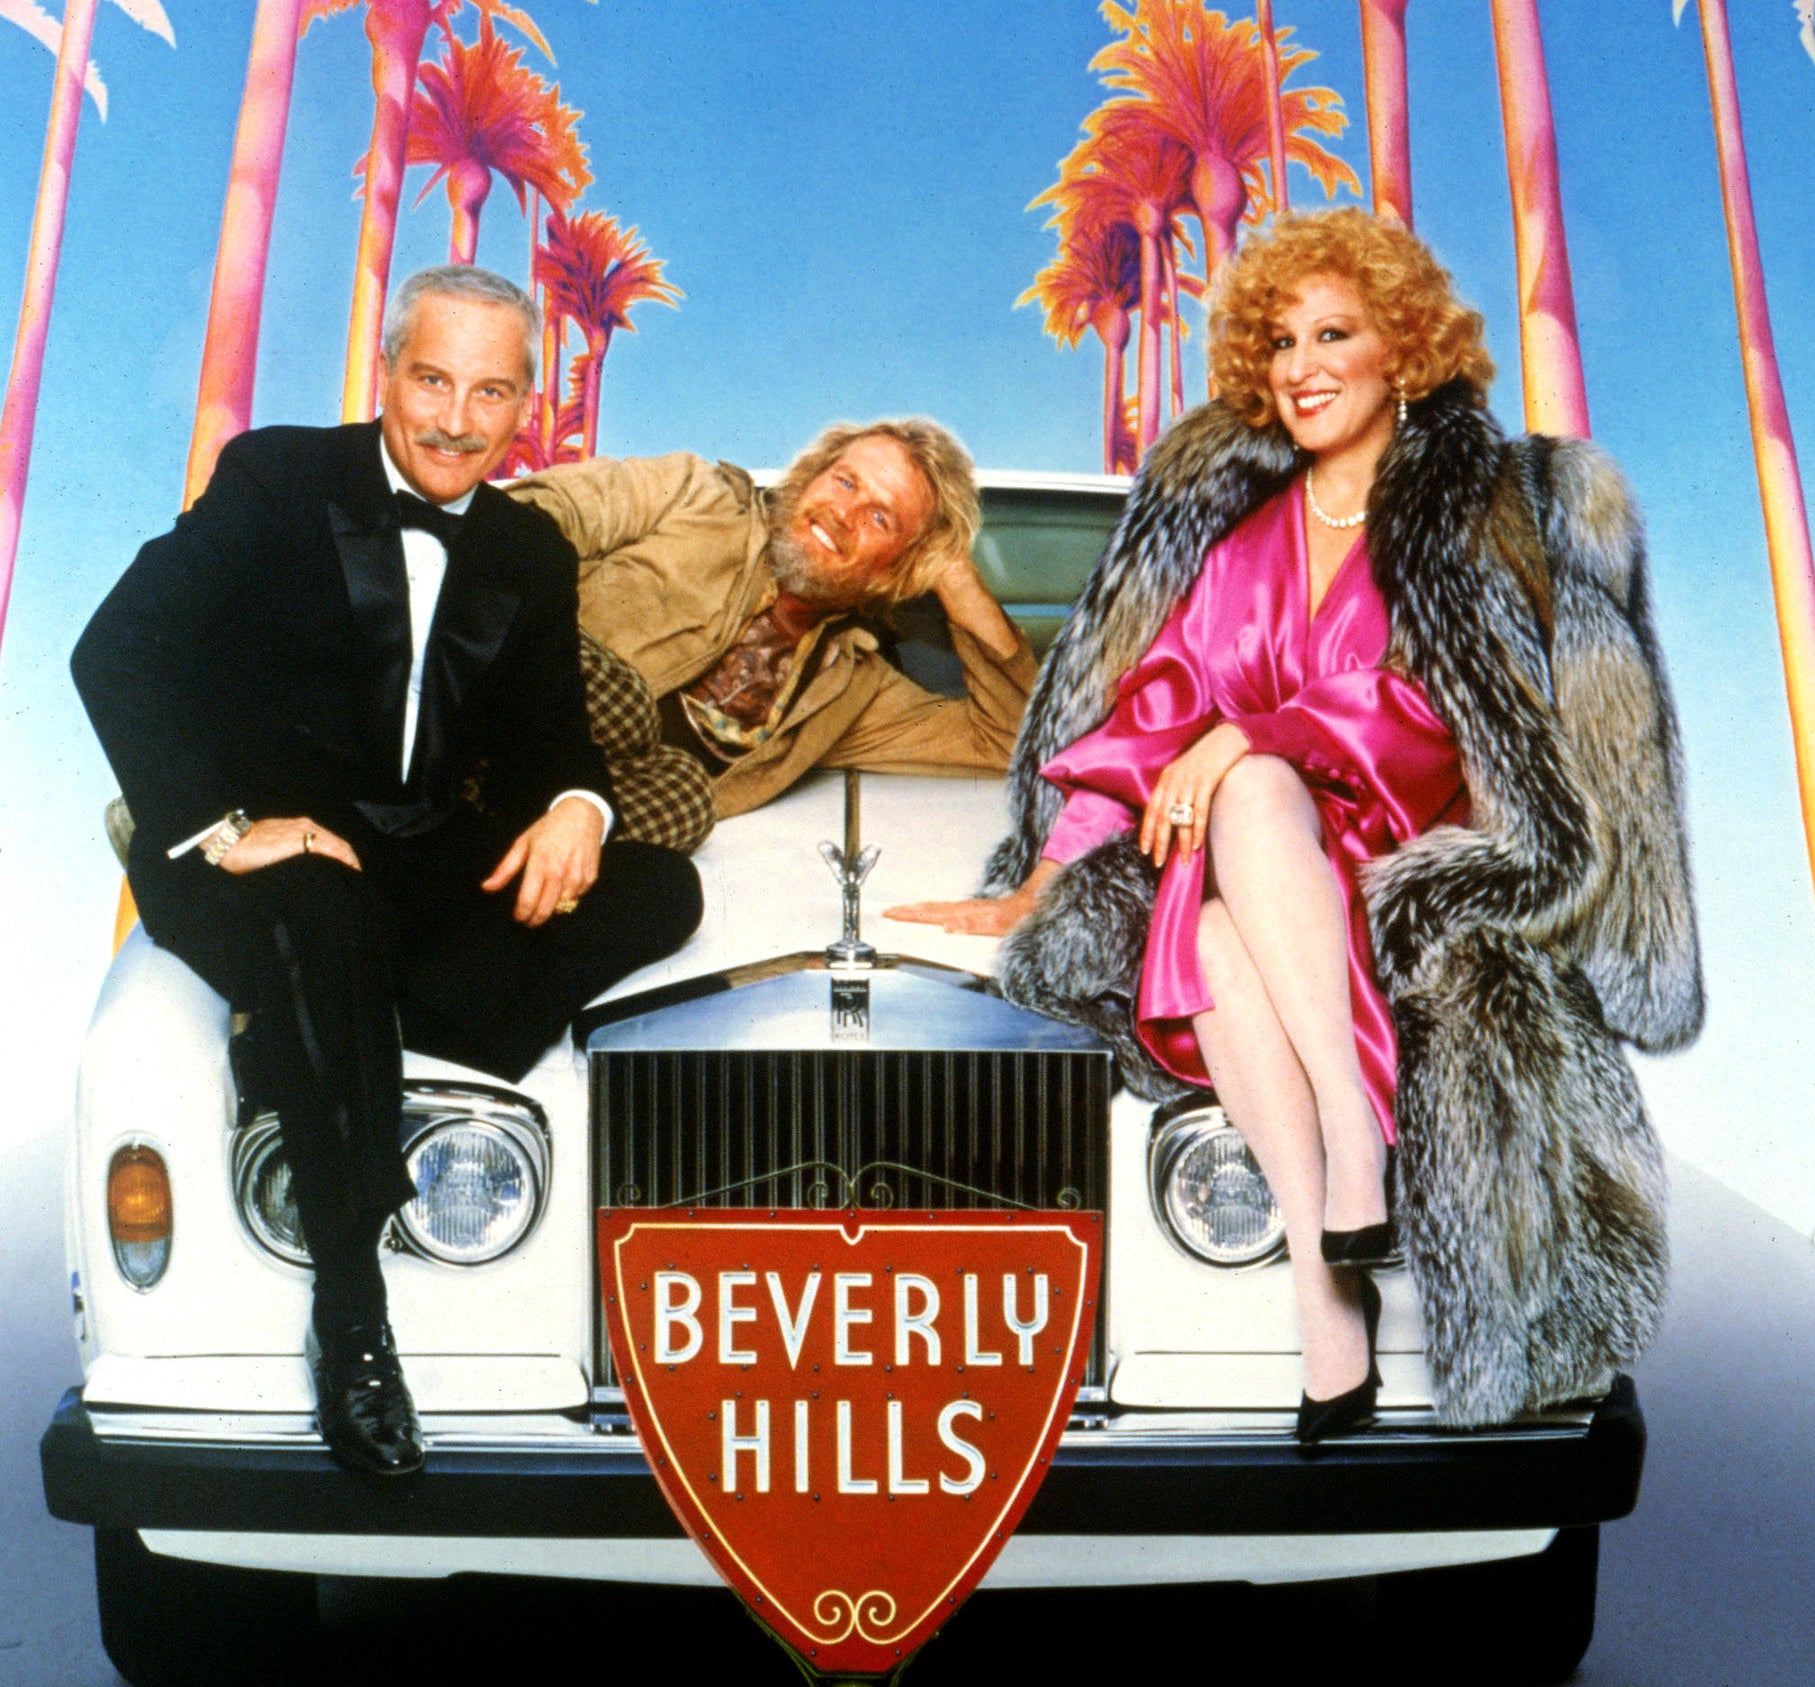 The poster for the movie featuring Richard Dreyfuss, Nick Nolte, and Bette Midler sitting on a Rolls